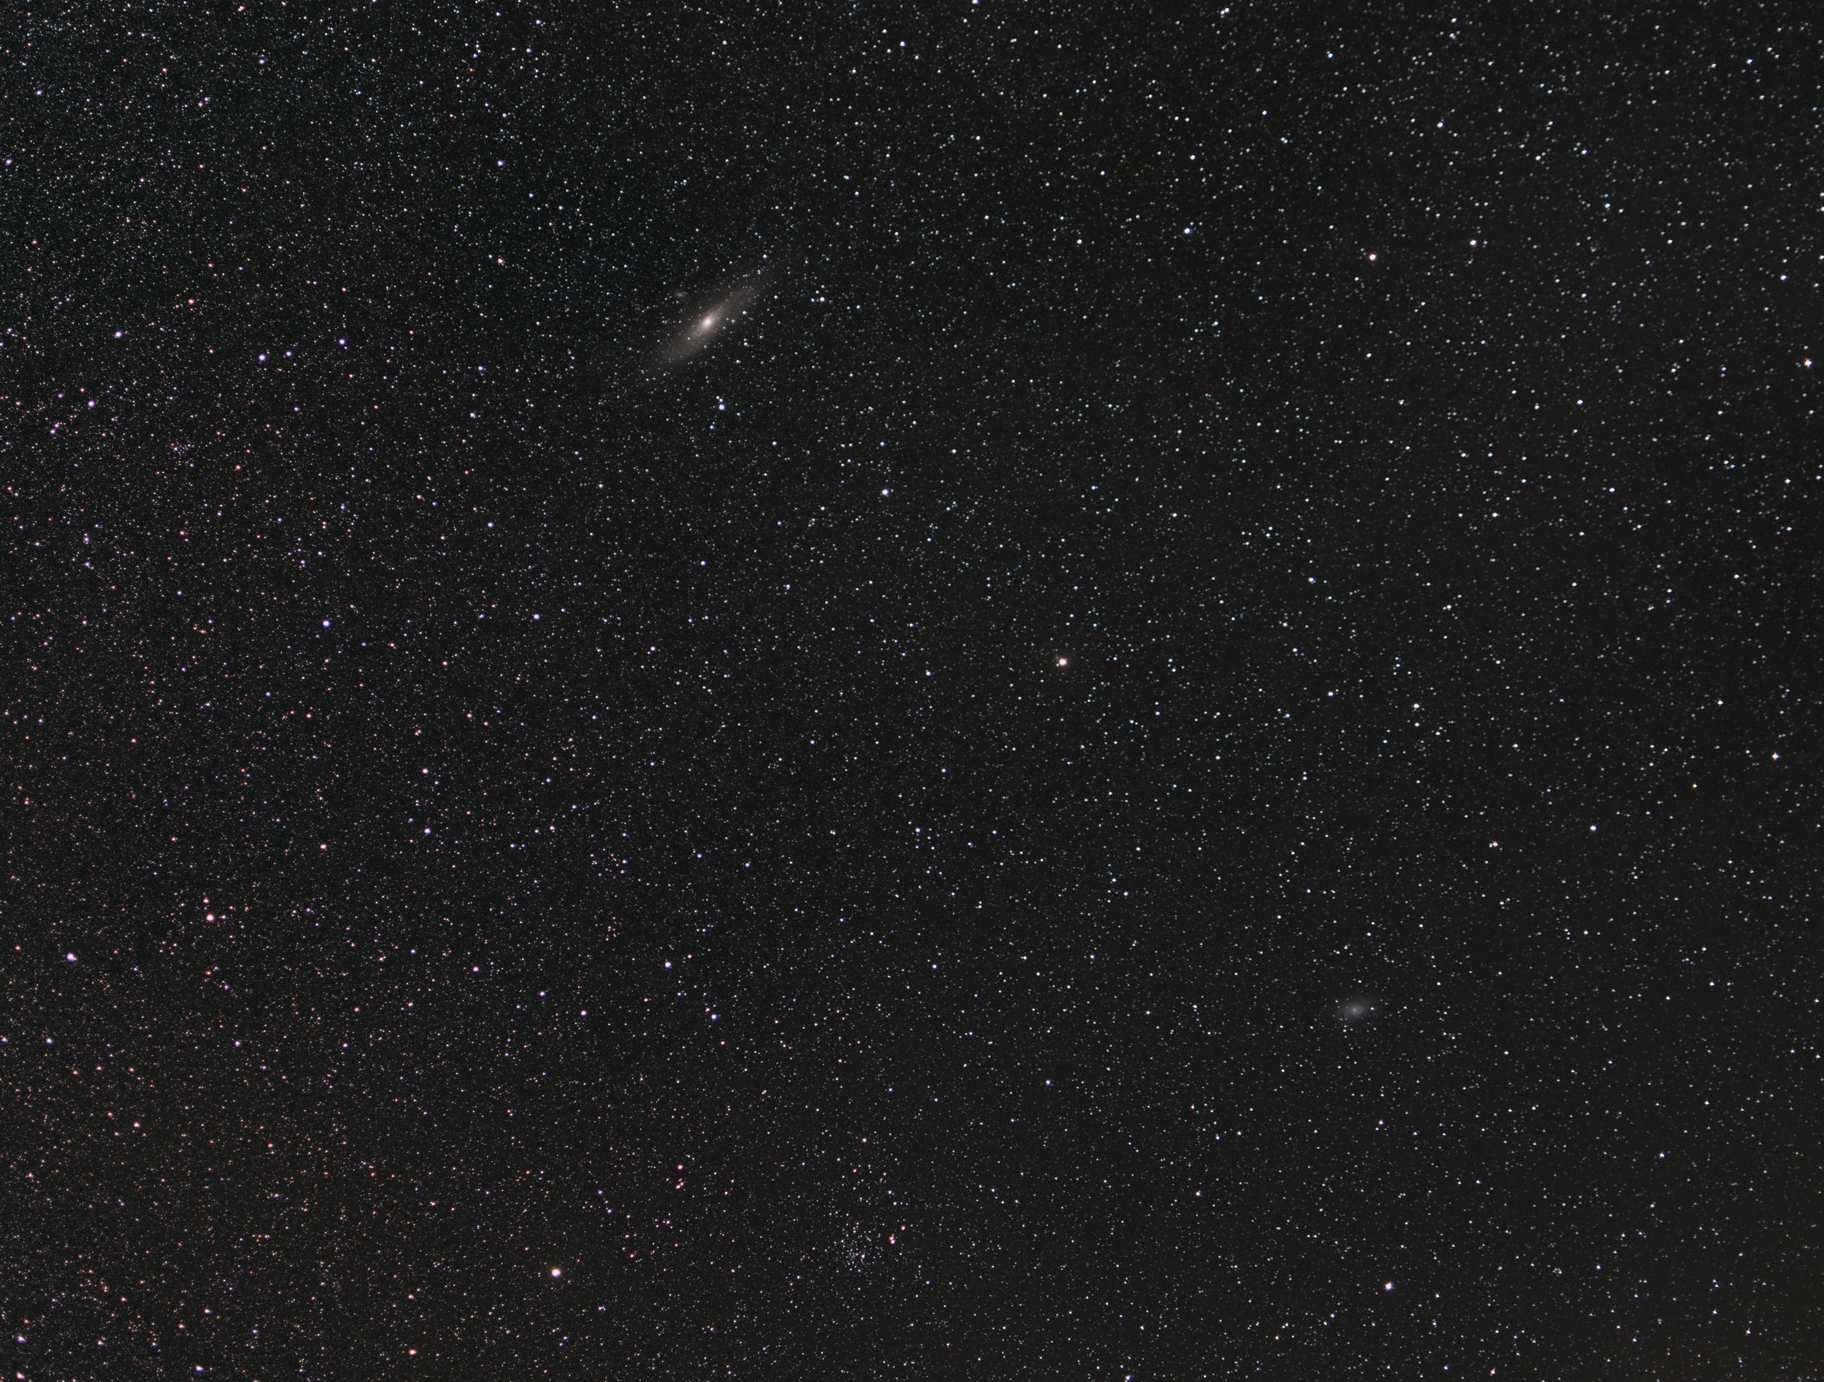 Very widefield view, including Andromeda (m31)